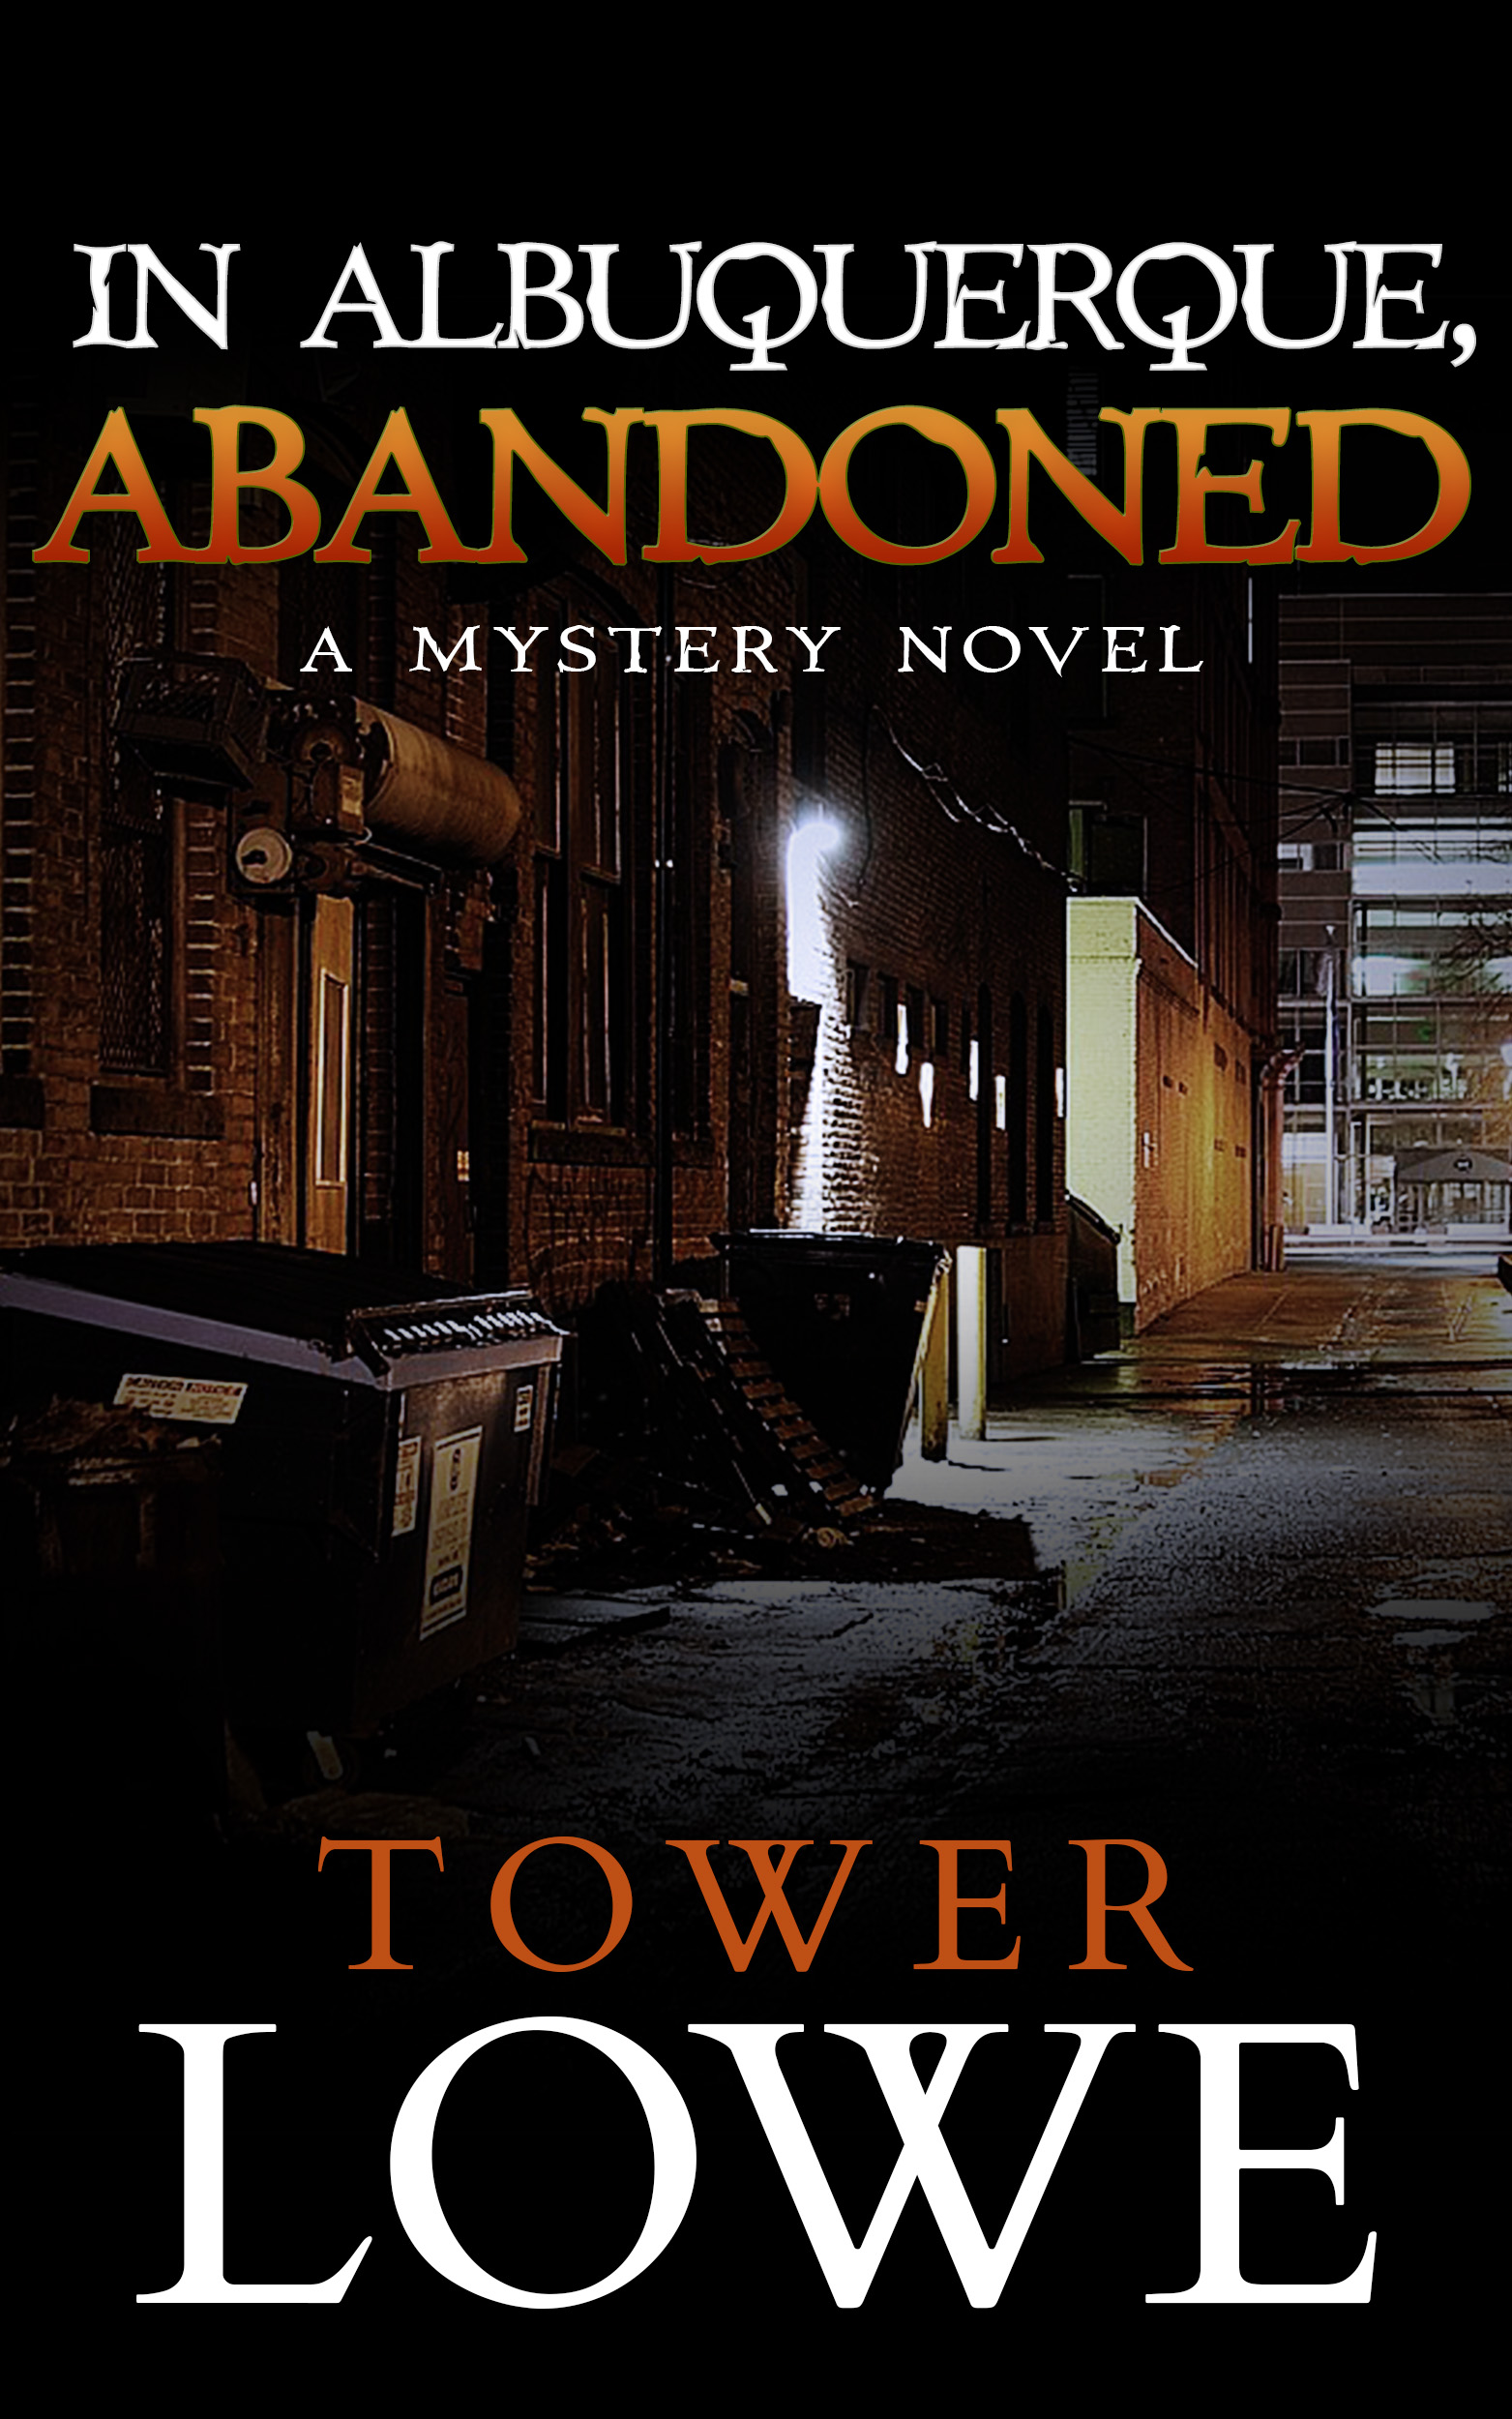 FREE: In Albuquerque, Abandoned by Tower Lowe